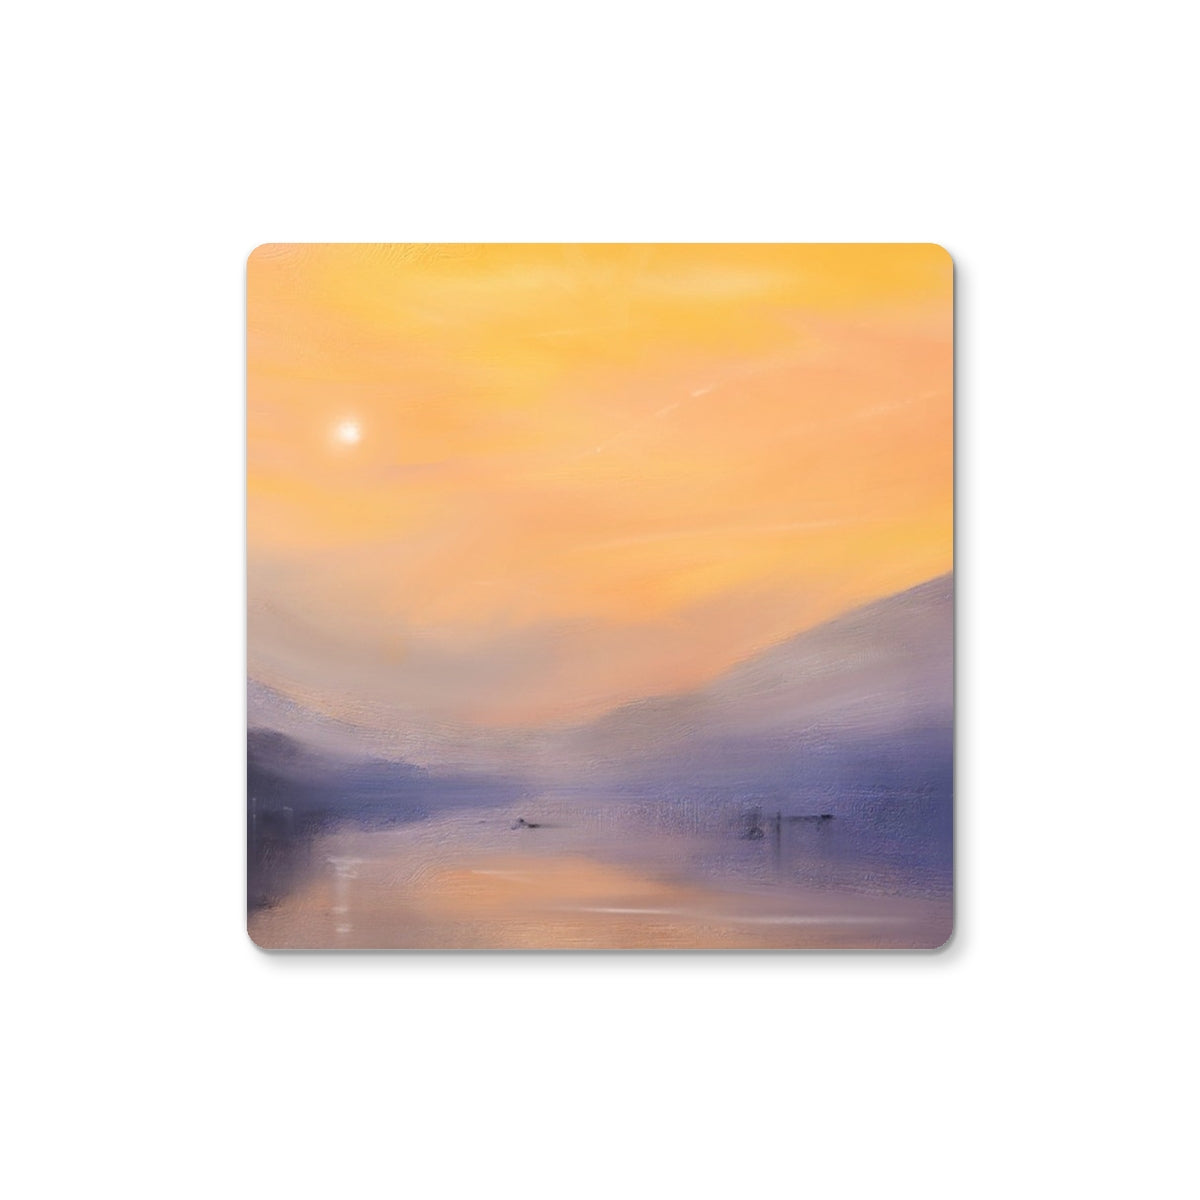 Loch Eck Dusk Art Gifts Coaster-Homeware-Scottish Lochs & Mountains Art Gallery-2 Coasters-Paintings, Prints, Homeware, Art Gifts From Scotland By Scottish Artist Kevin Hunter